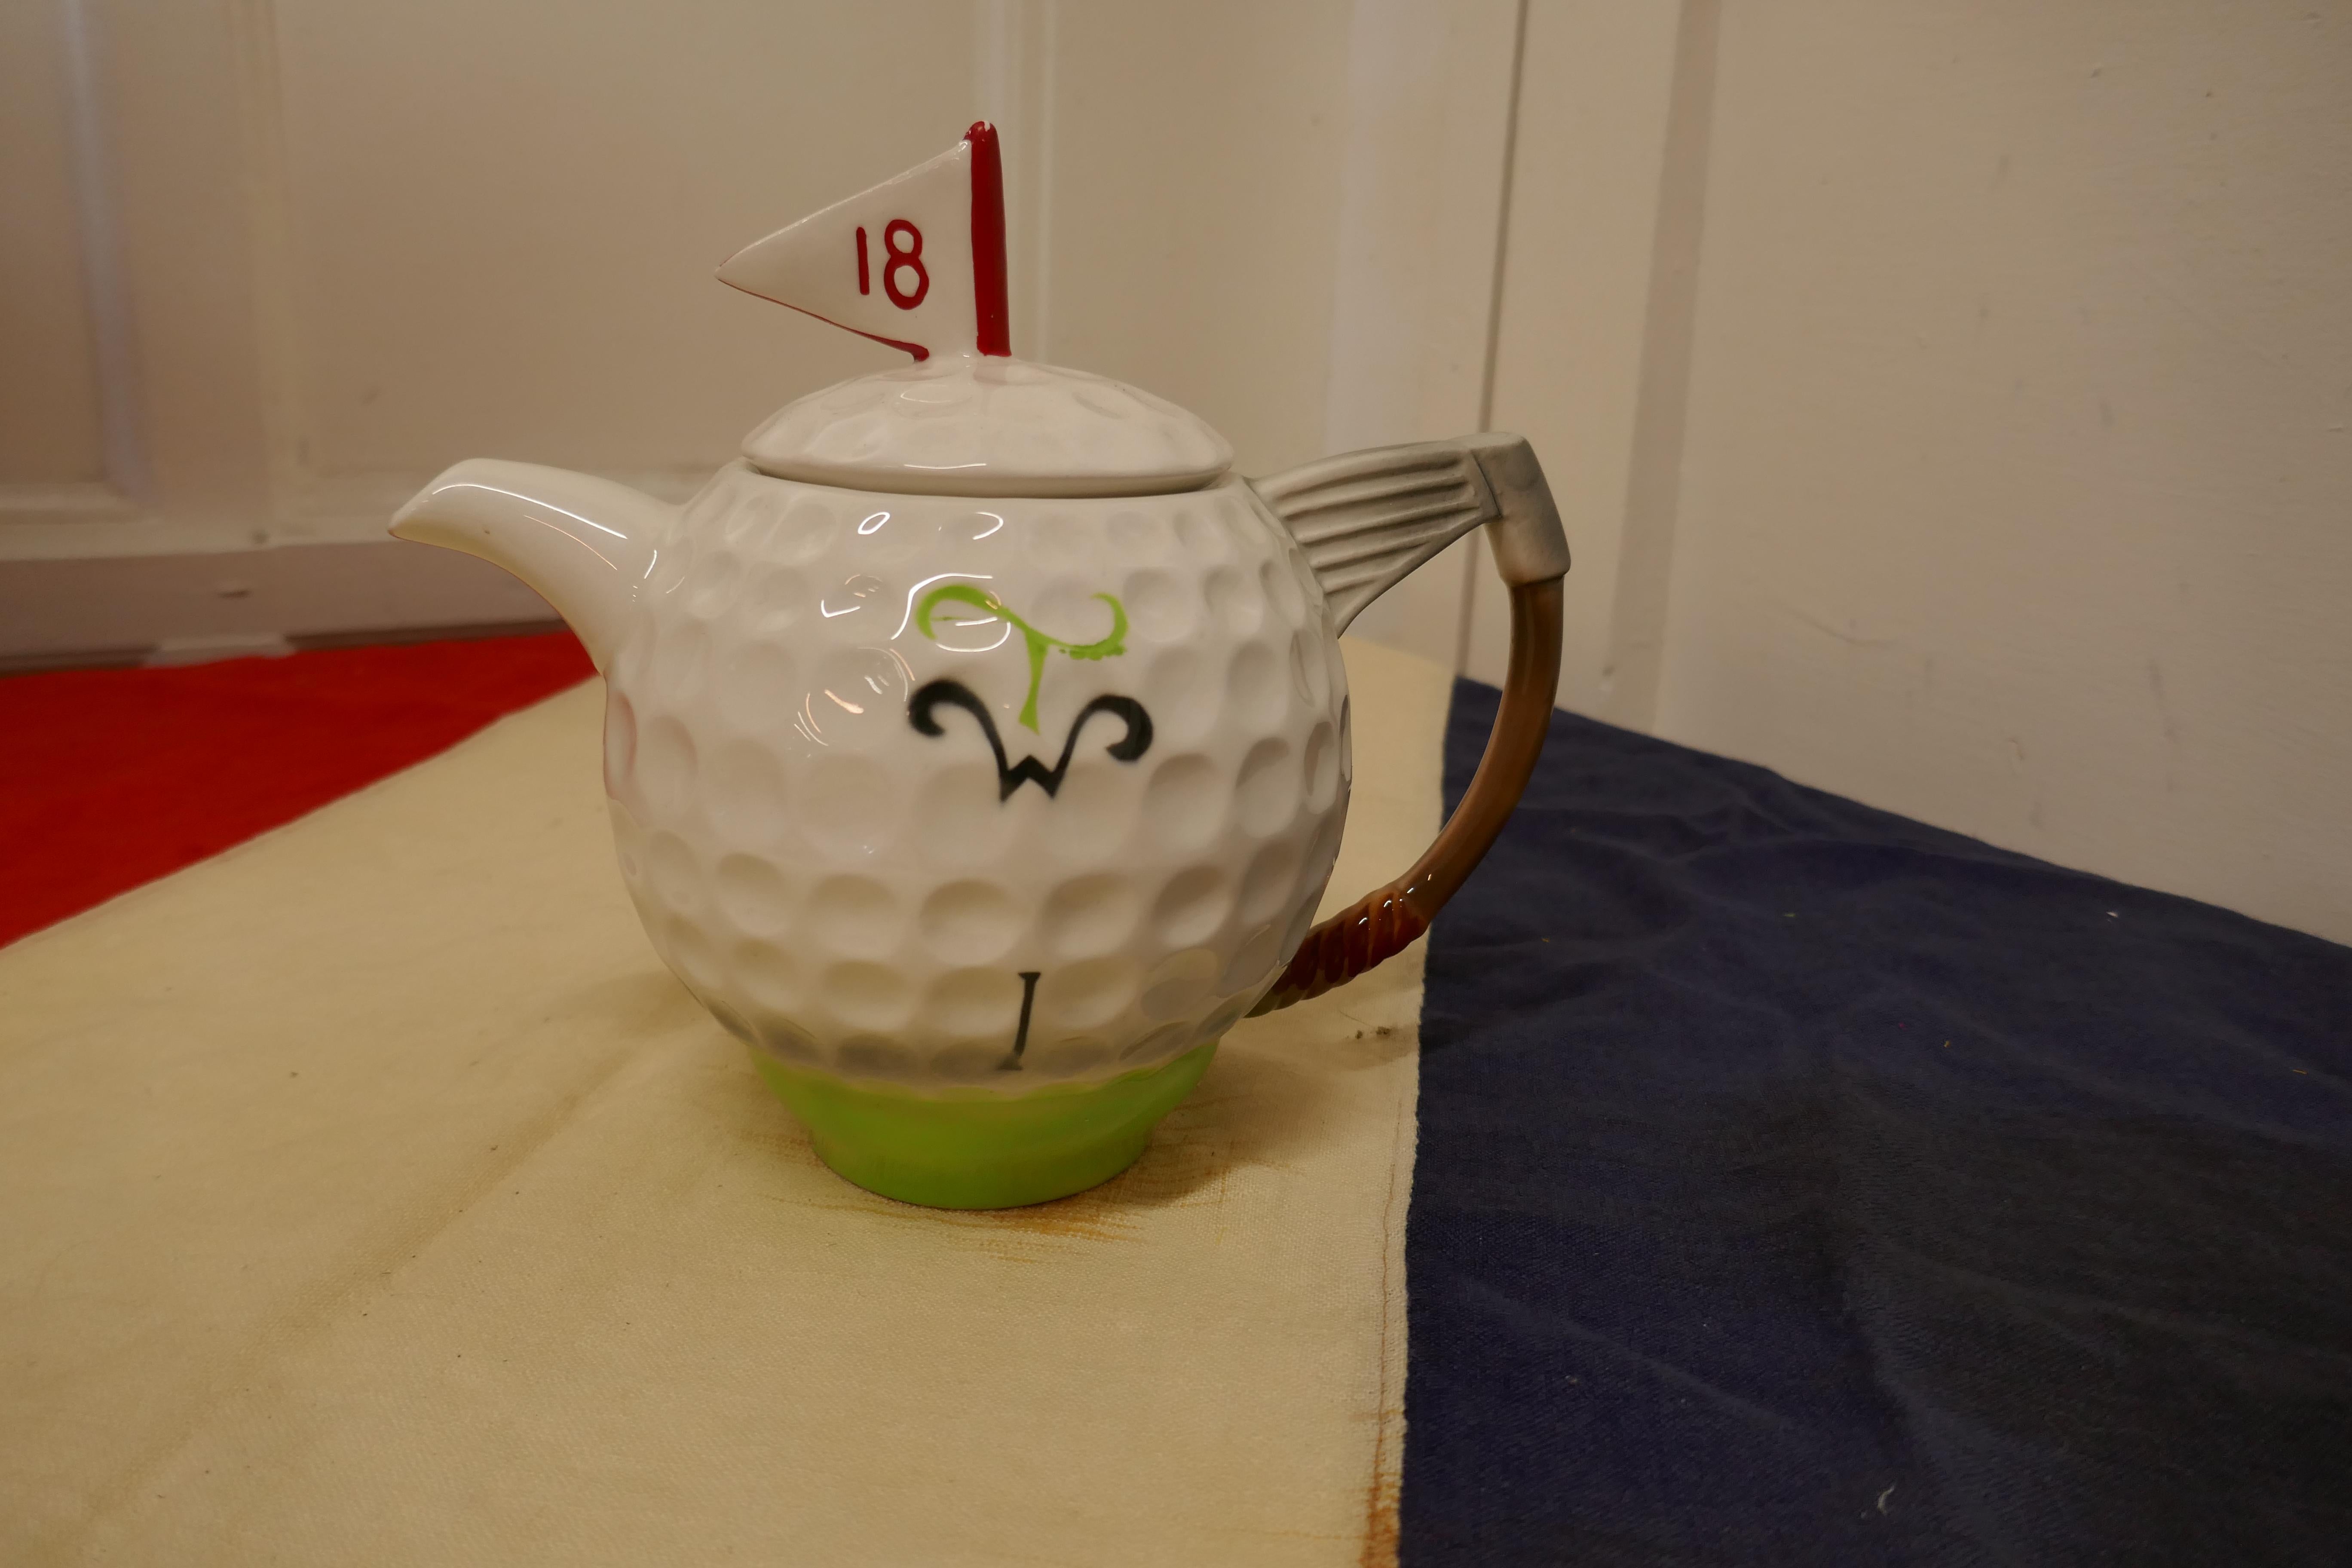 Novelty Vintage TeaPot in the form of a Golf Ball

The Pot is a 2 pint size made by the Tony Wood Studio celebrating the 19 hole
A Great Vintage piece inn good condition, a good 18th Birthday Piece

The pot is 8” tall and 9” in